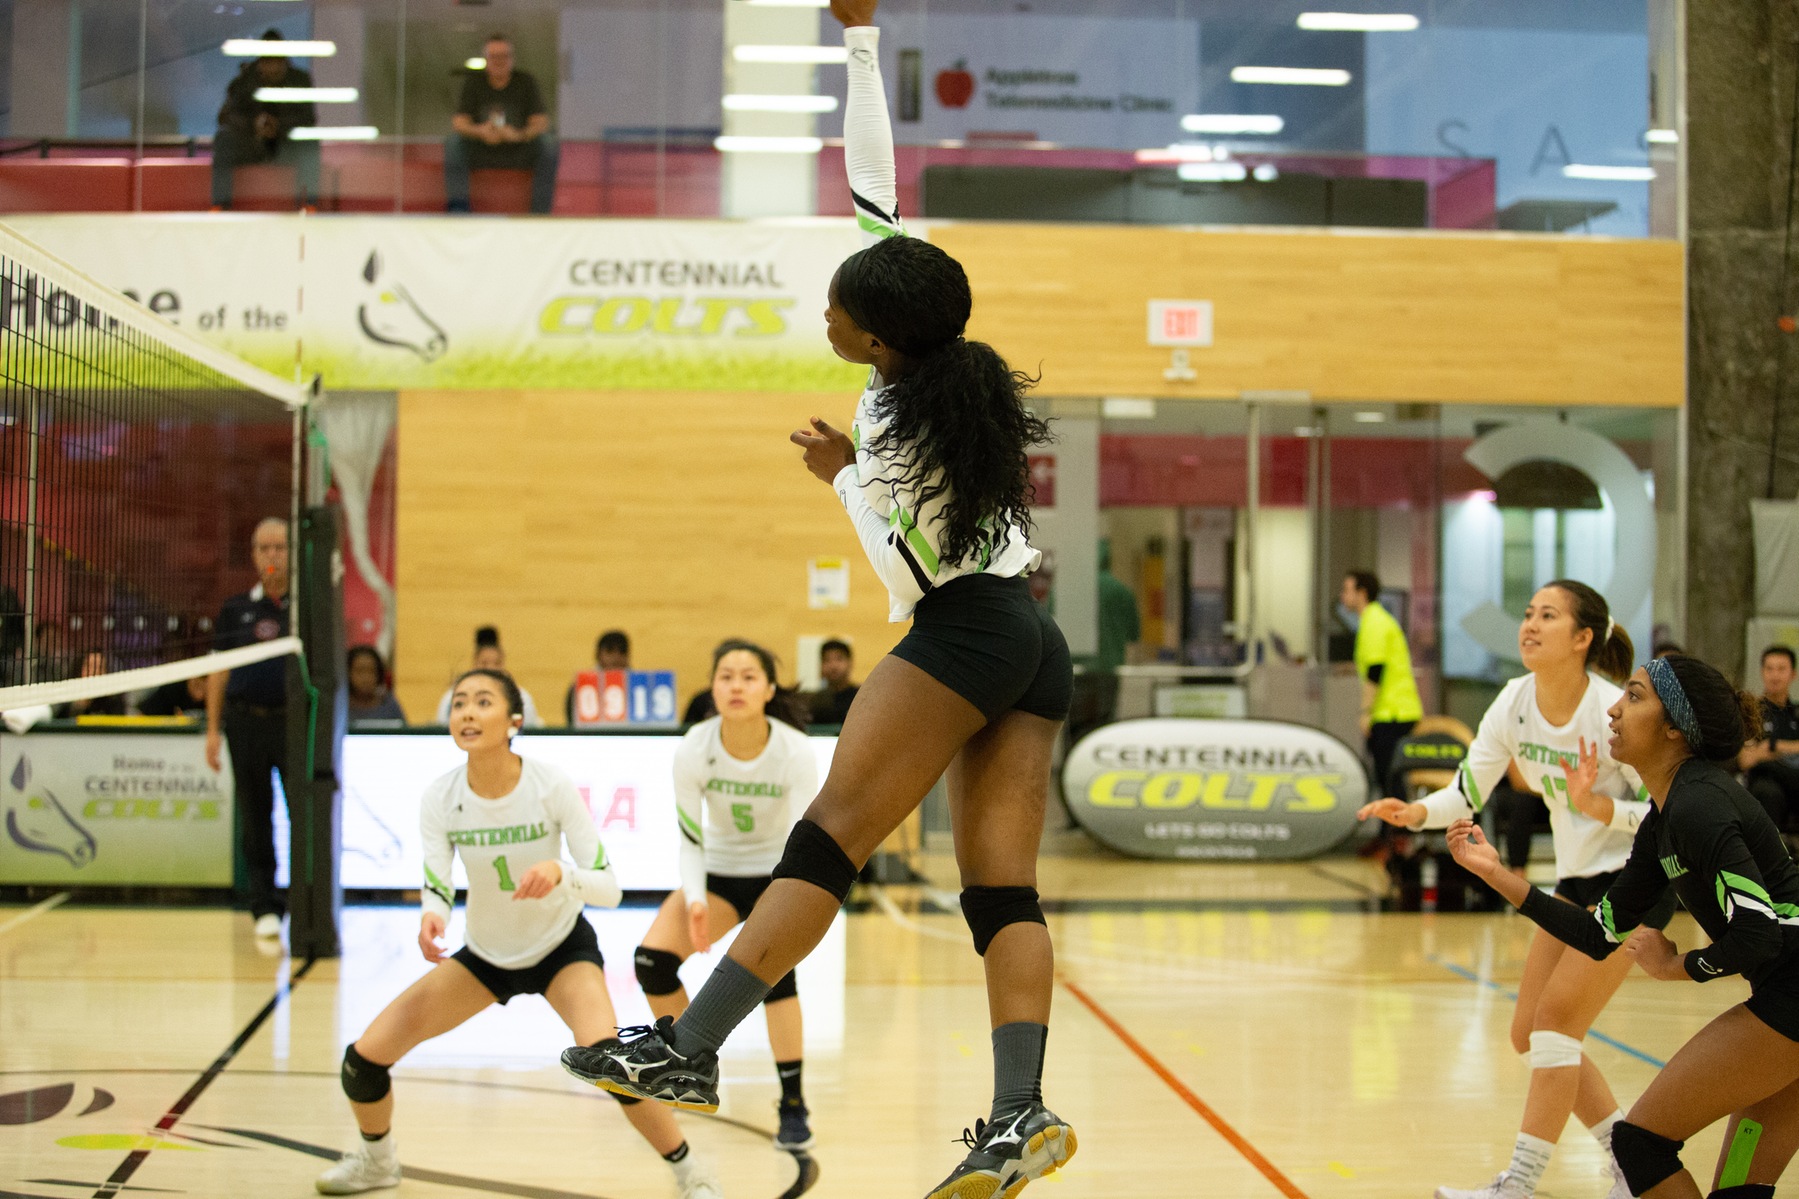 Stella Dada goes sky high for the kill during second set action in what was an easy win for the Centennial Colts against the Fleming Knights. (Nicole Ventura/Colts Media)